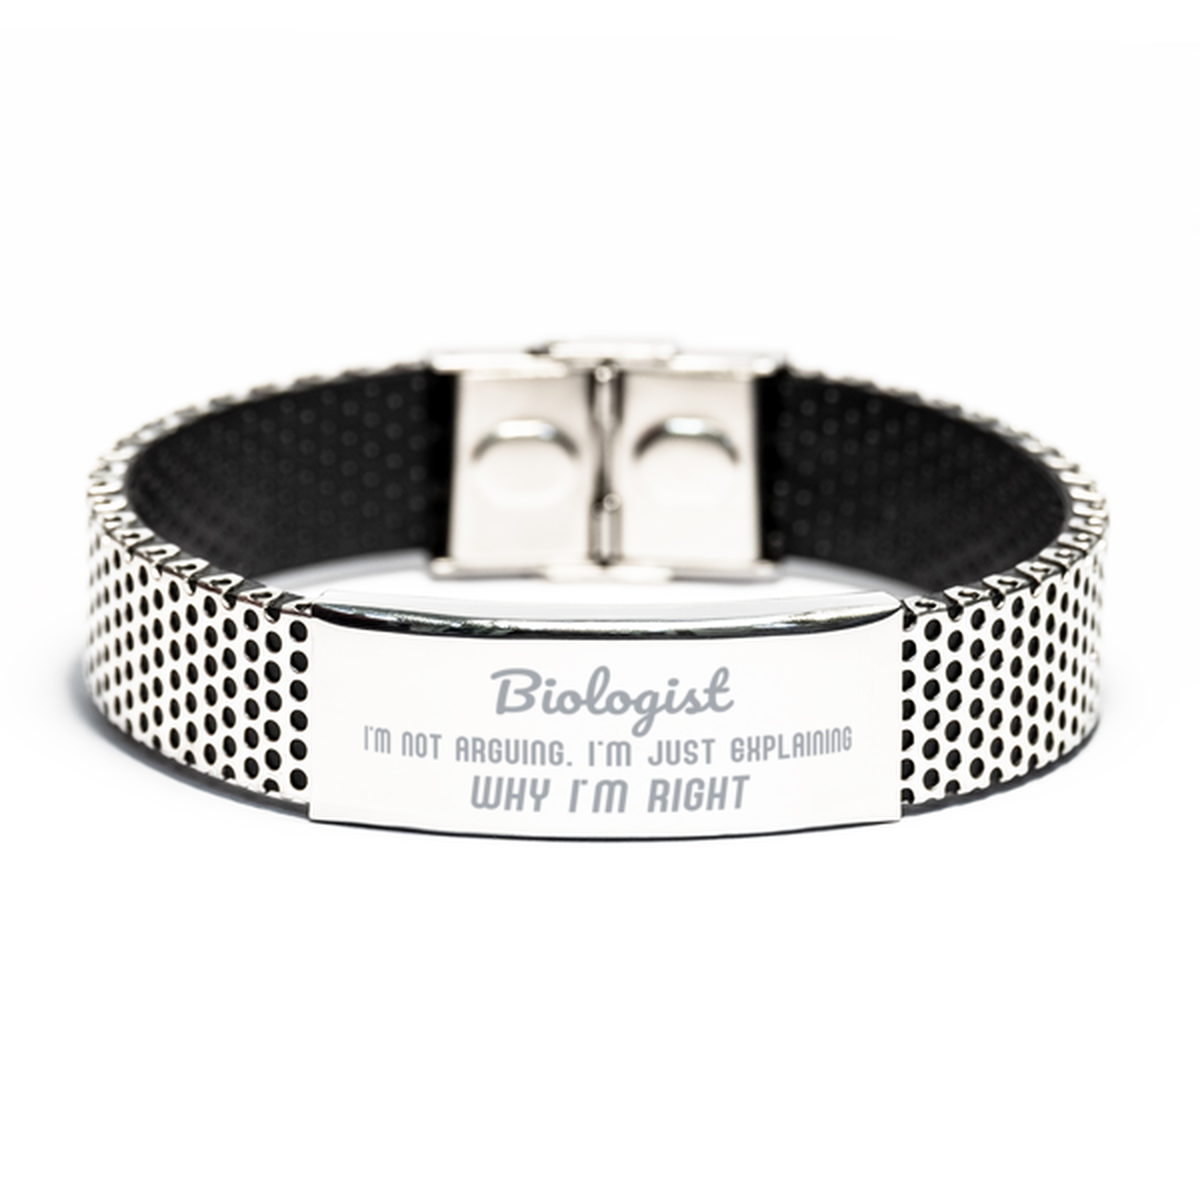 Biologist I'm not Arguing. I'm Just Explaining Why I'm RIGHT Stainless Steel Bracelet, Funny Saying Quote Biologist Gifts For Biologist Graduation Birthday Christmas Gifts for Men Women Coworker